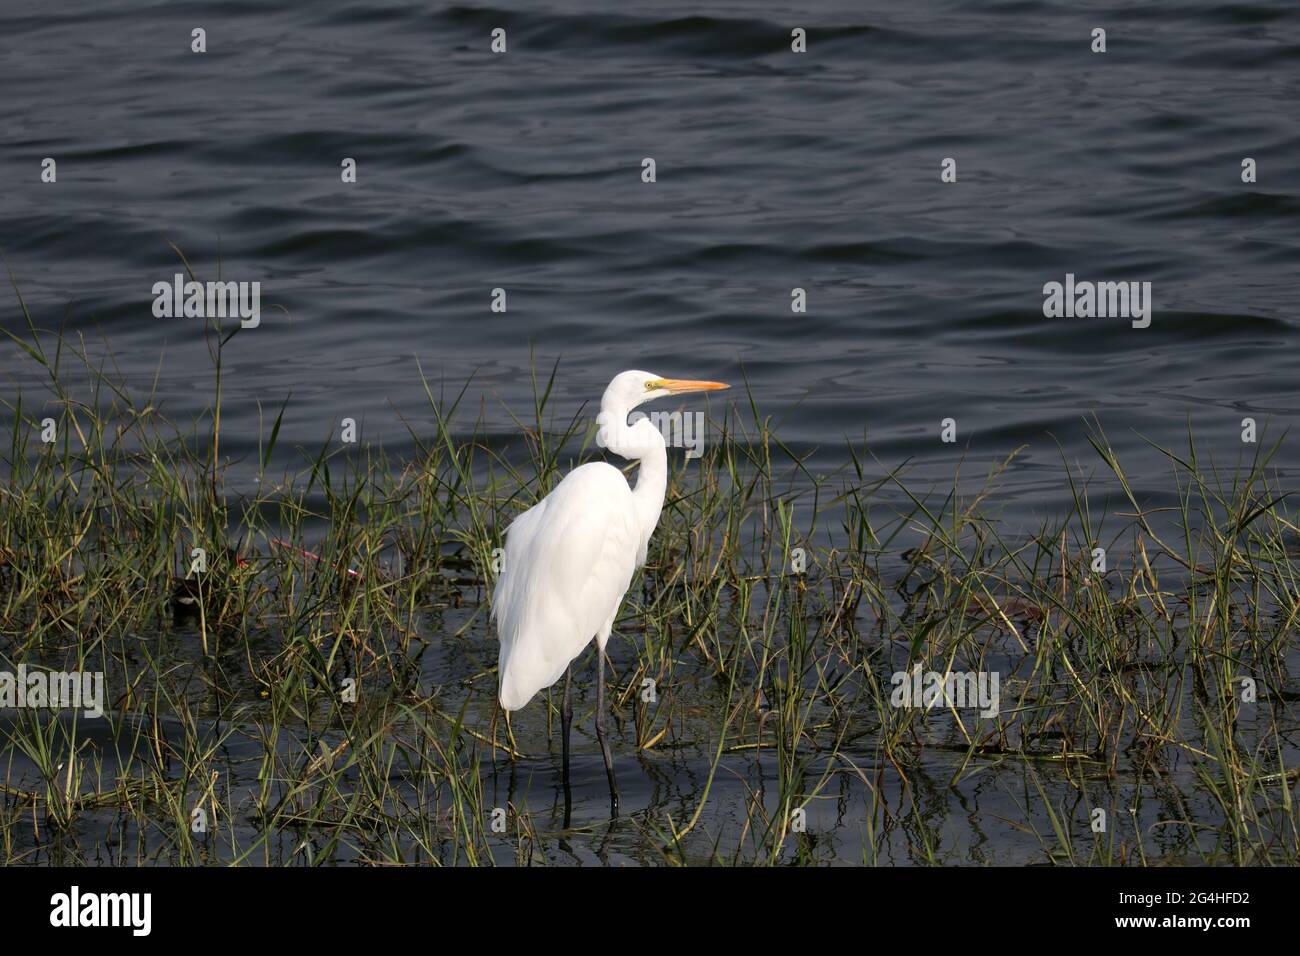 The heron stands on the water in the reeds. Stock Photo